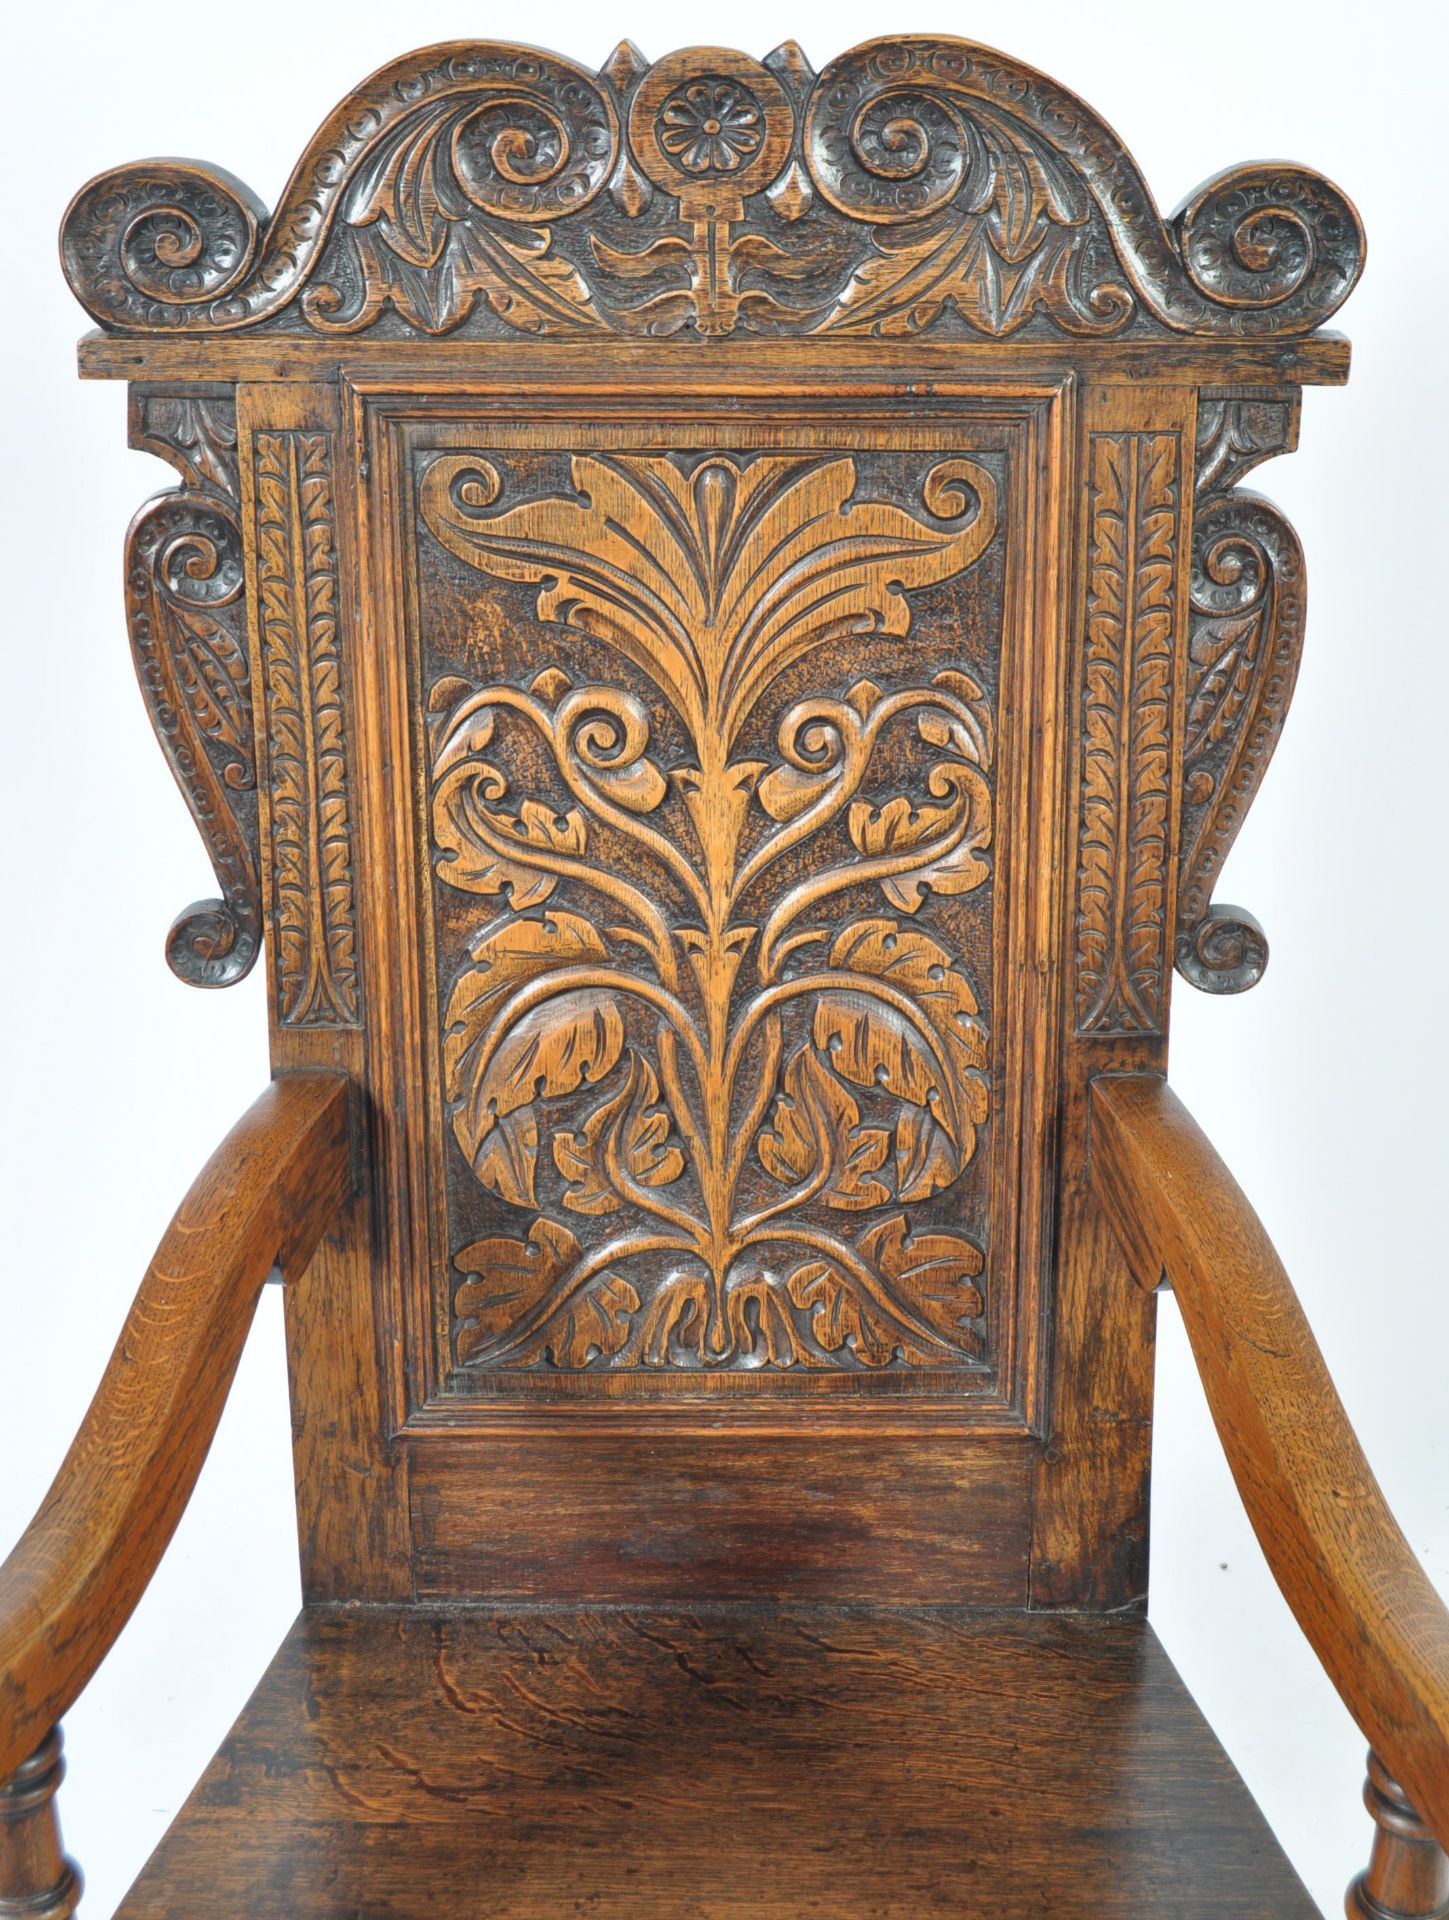 PAIR OF EARLY 20TH CENTURY OAK WAINSCOT CHAIRS - Image 5 of 6